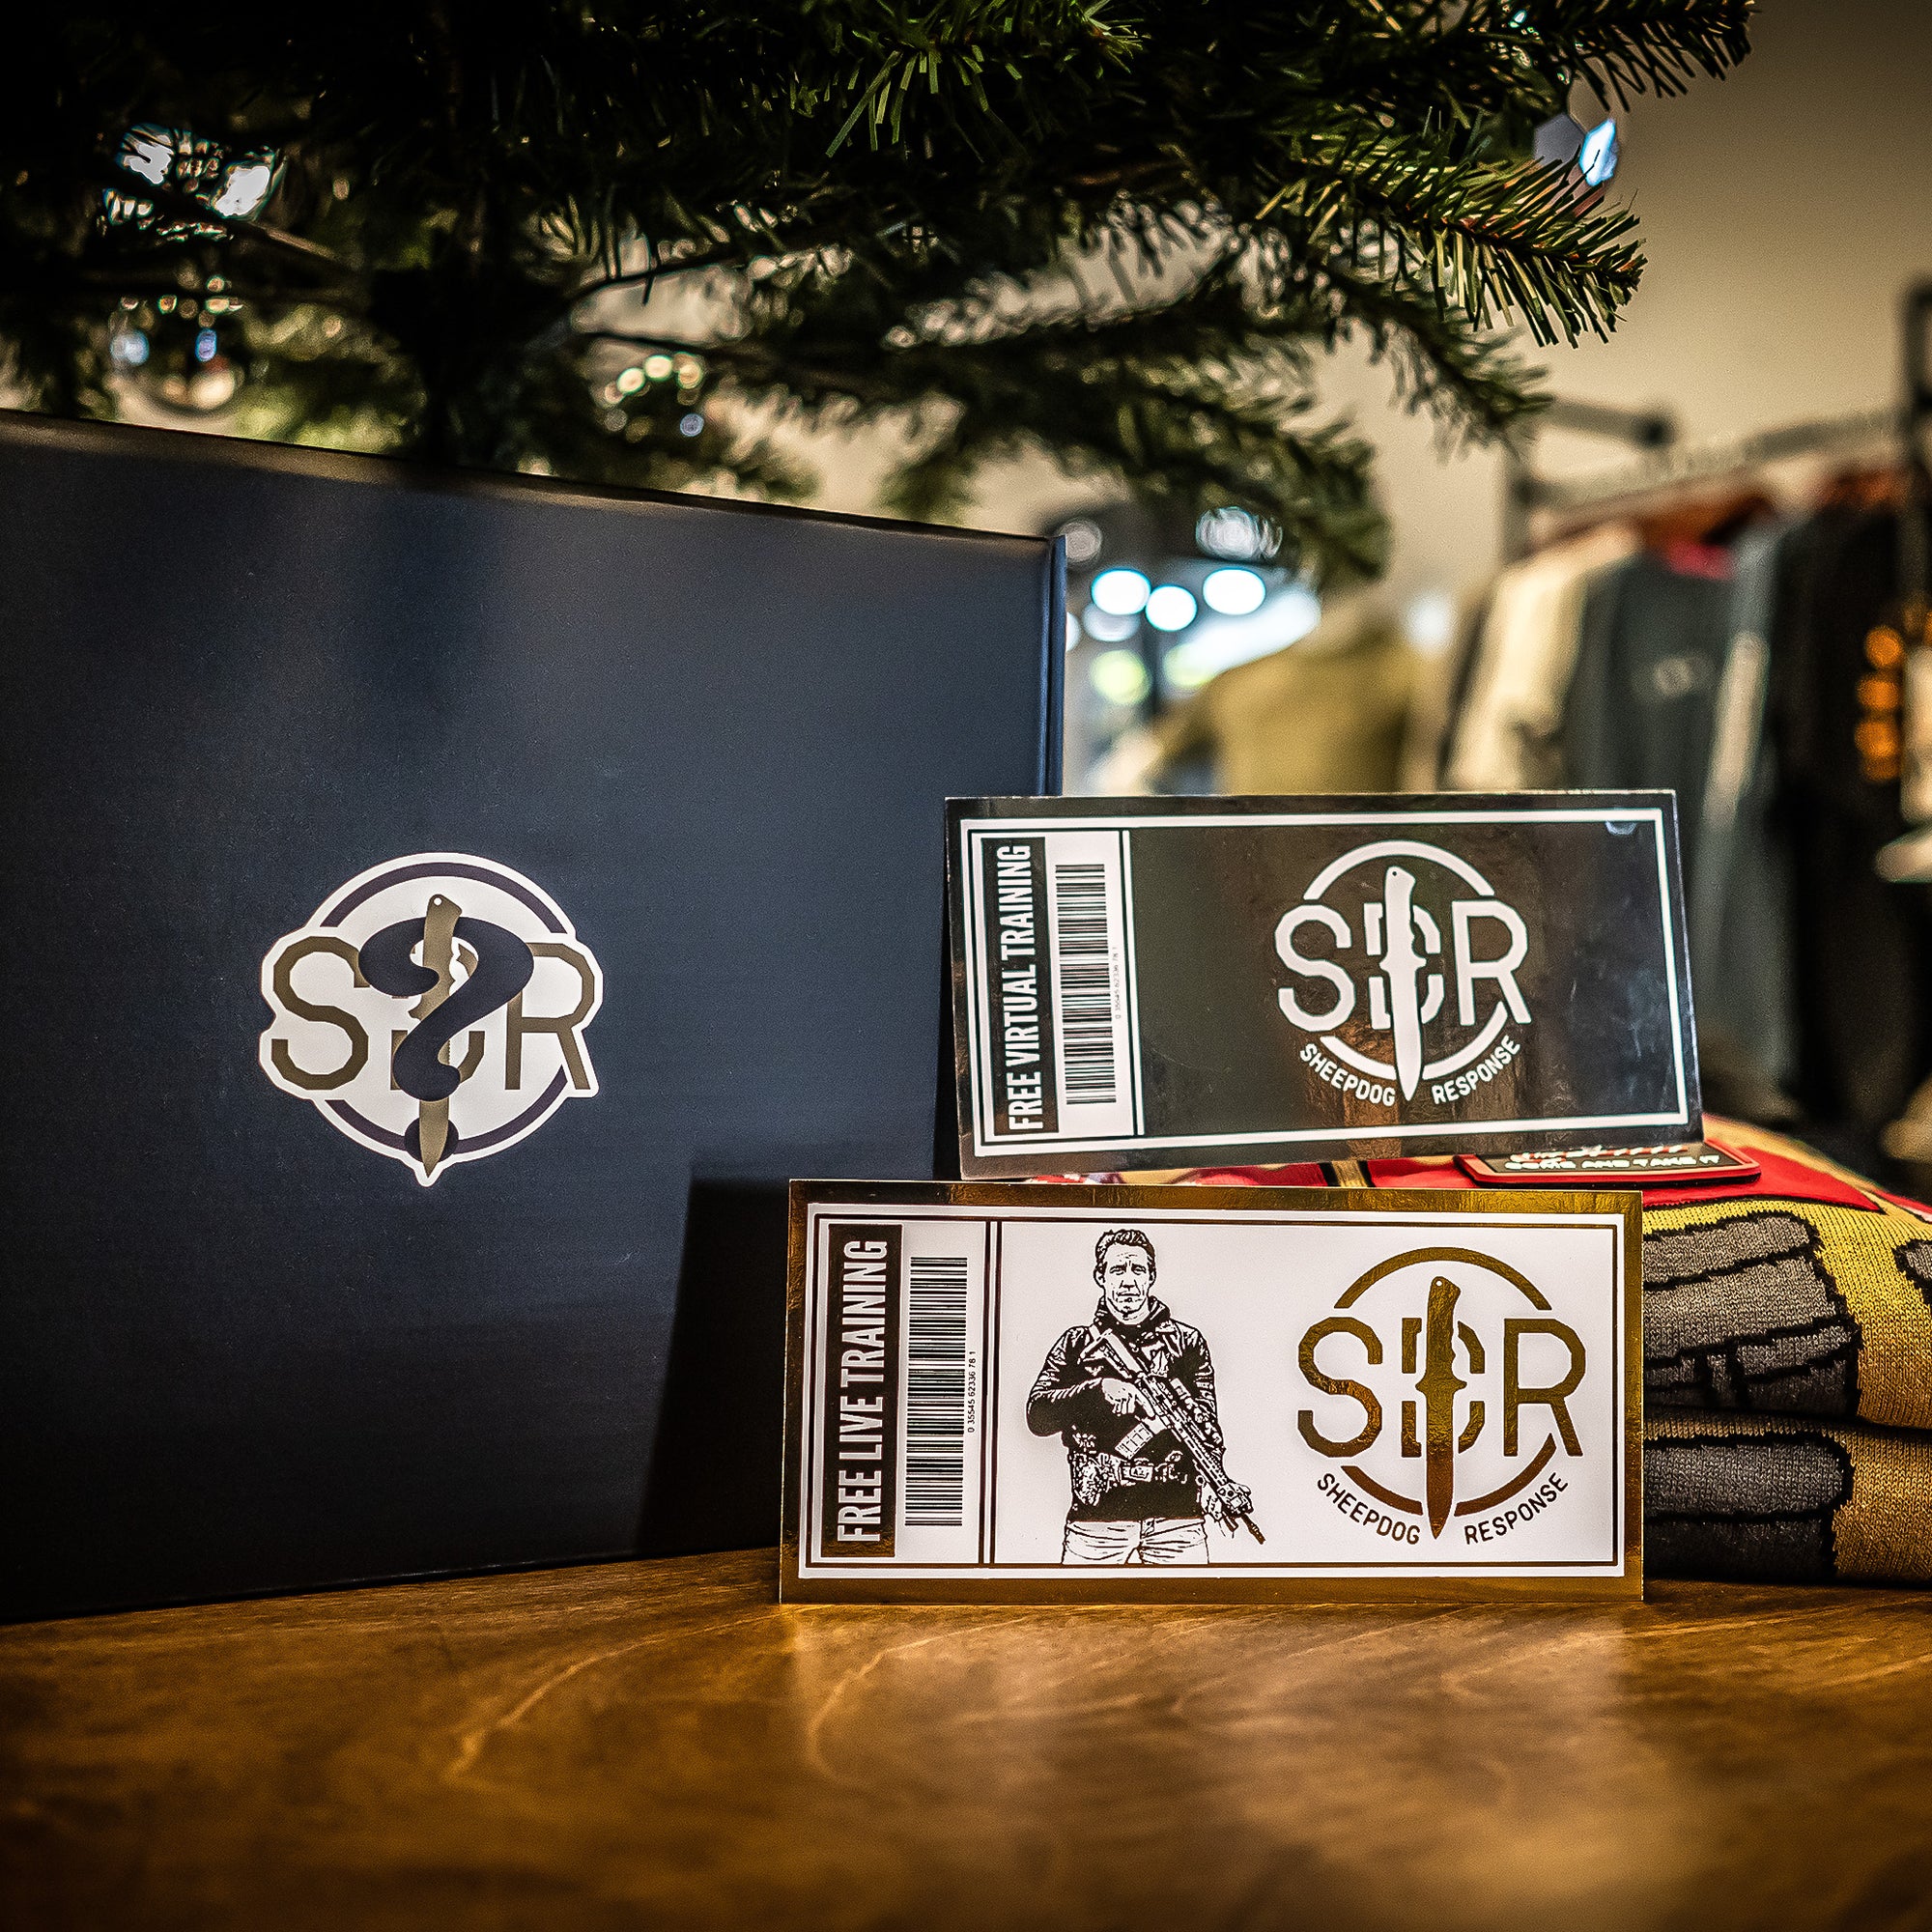 Holiday Mystery Boxes are here, with a chance to win a Gold or Silver Ticket to unlock even more excitement.